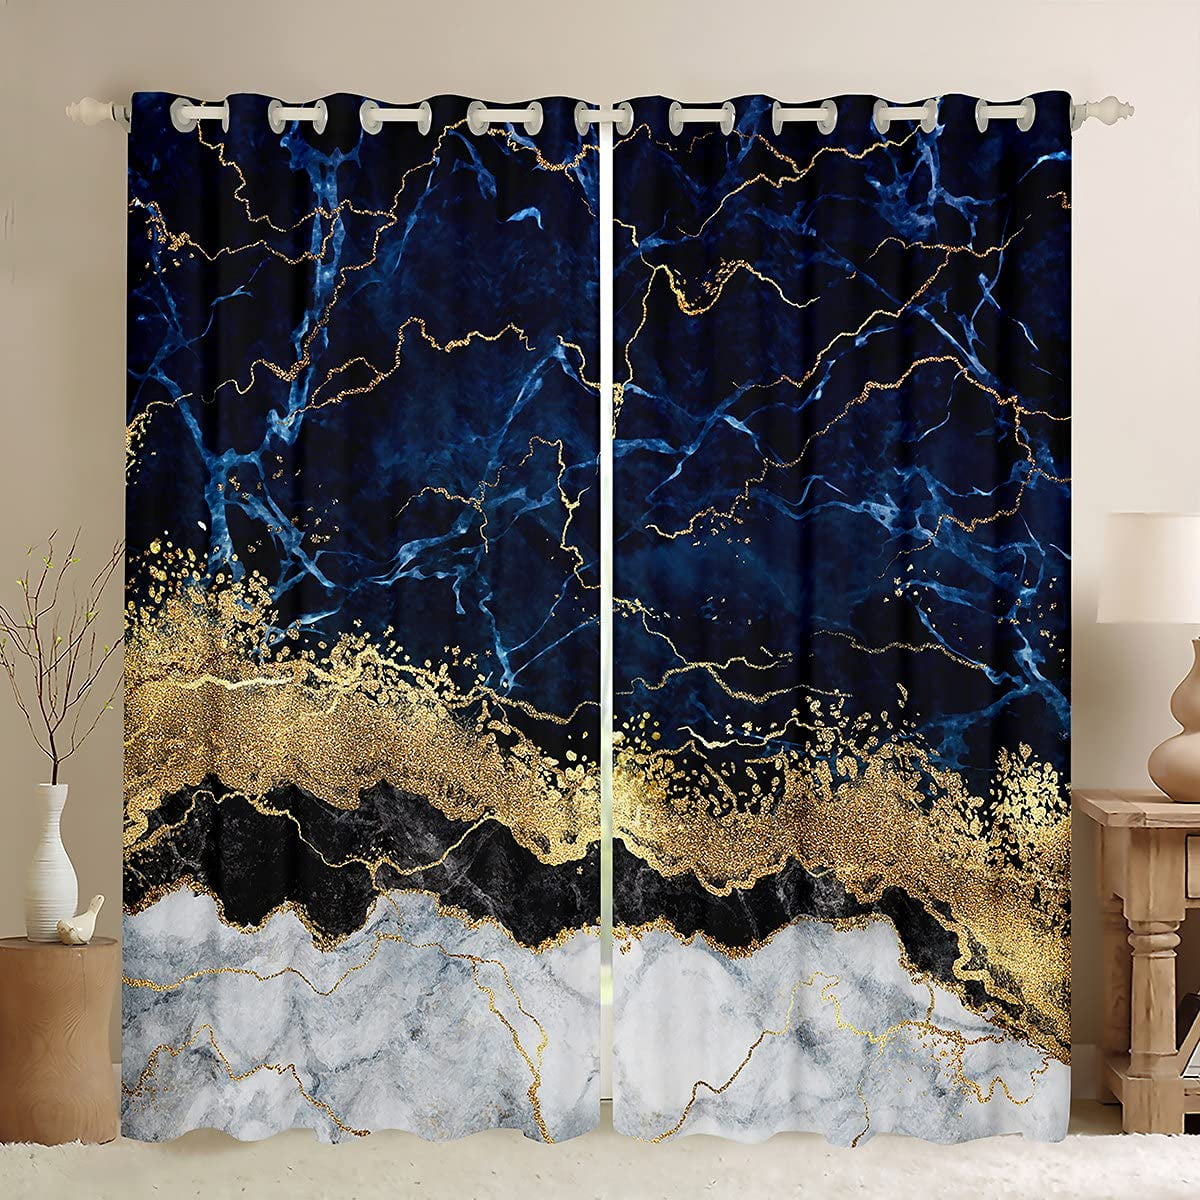 Yst Marble Window Drapes Gold Giltter Curtain Panels Navy Blue ...